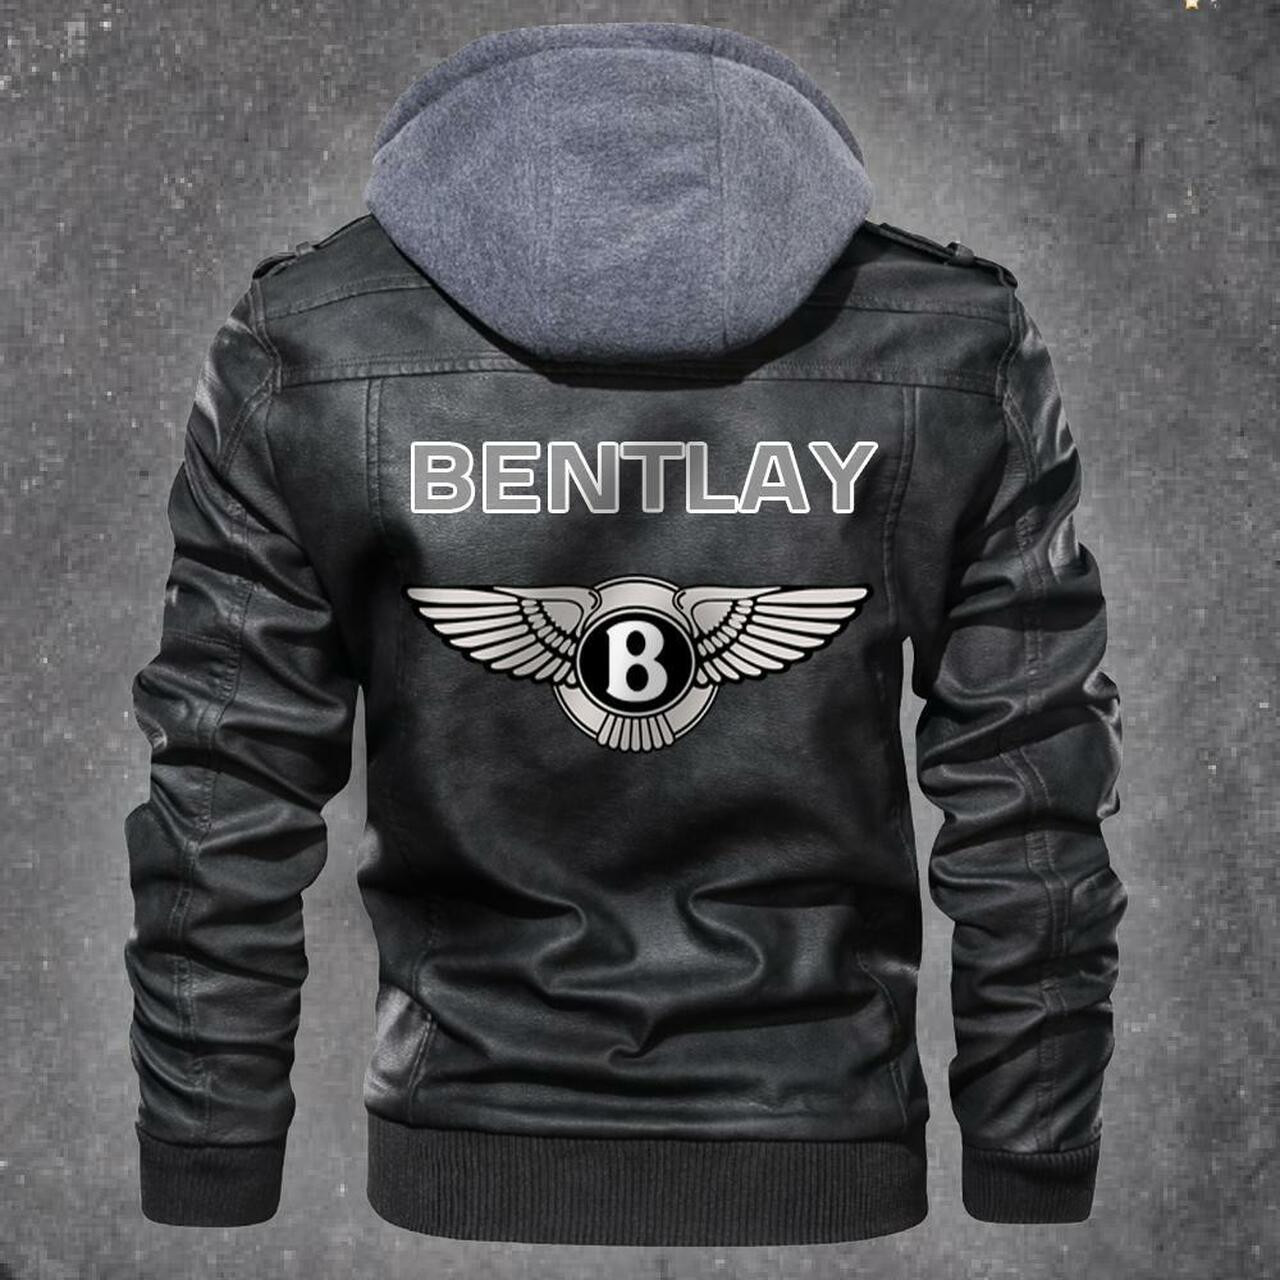 Check out and find the right leather jacket below 431